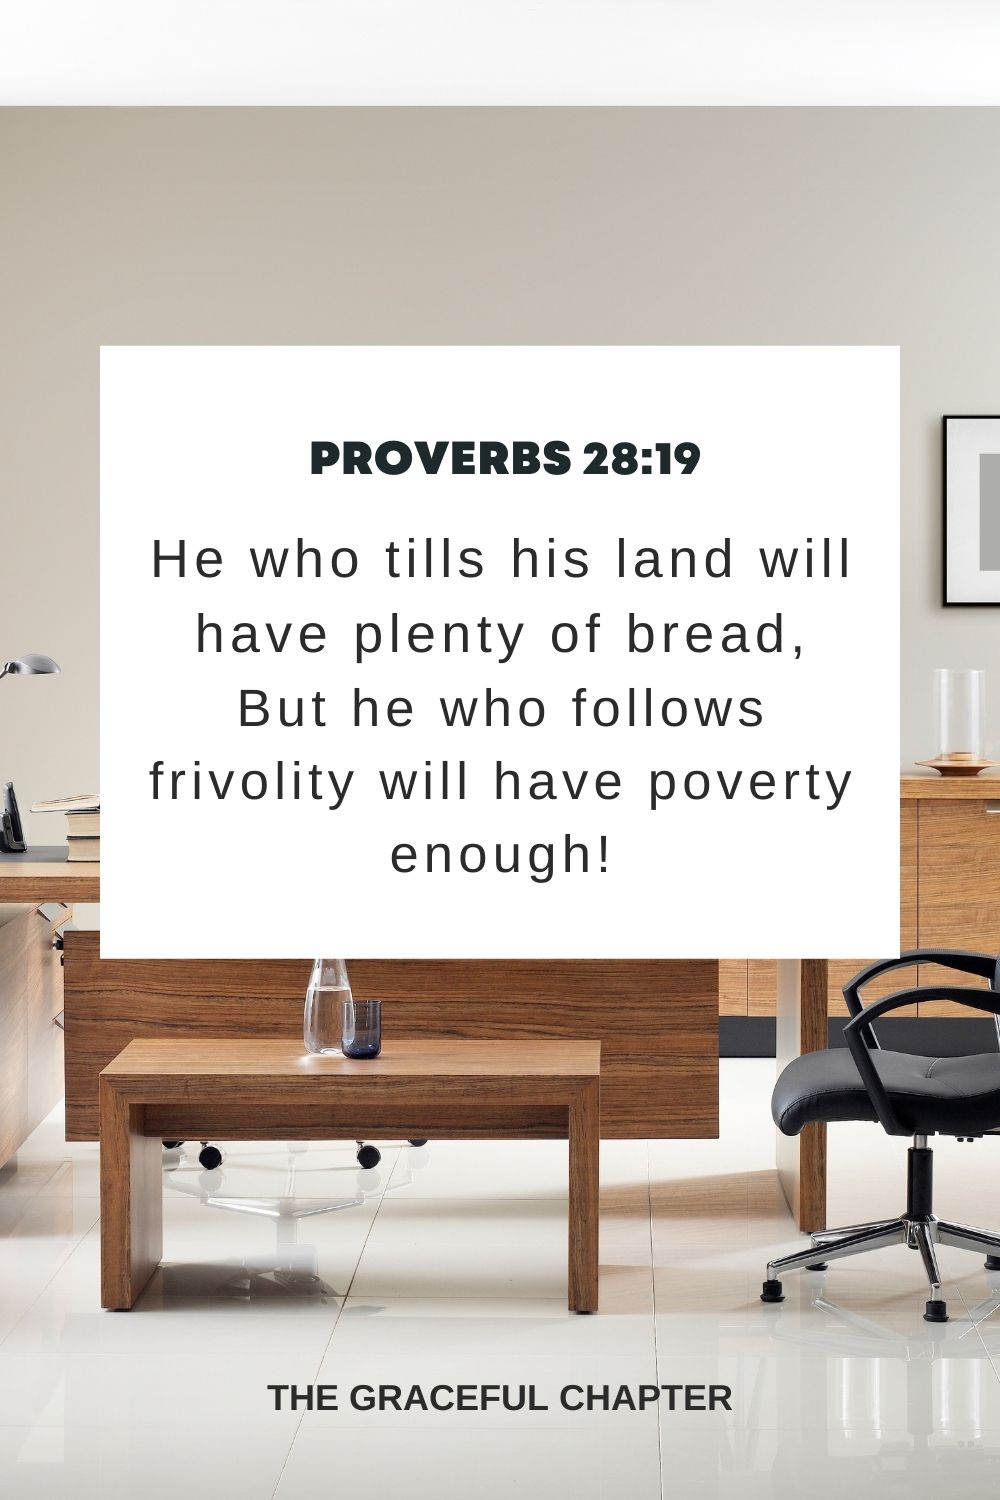 He who tills his land will have plenty of bread, But he who follows frivolity will have poverty enough! Proverbs 28:19